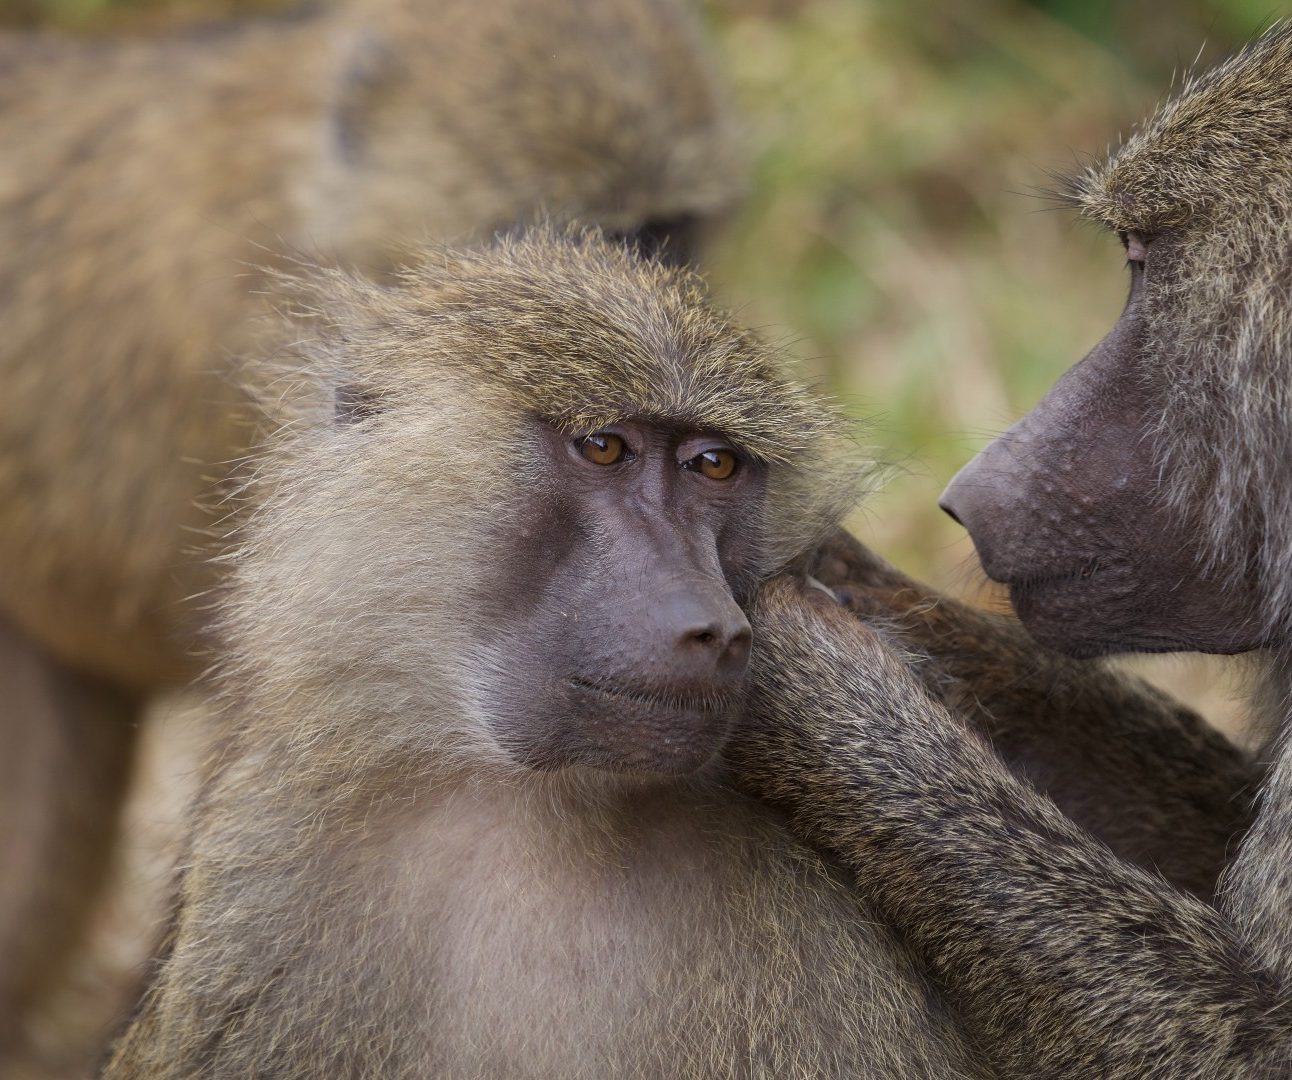 Two baboons grooming each other